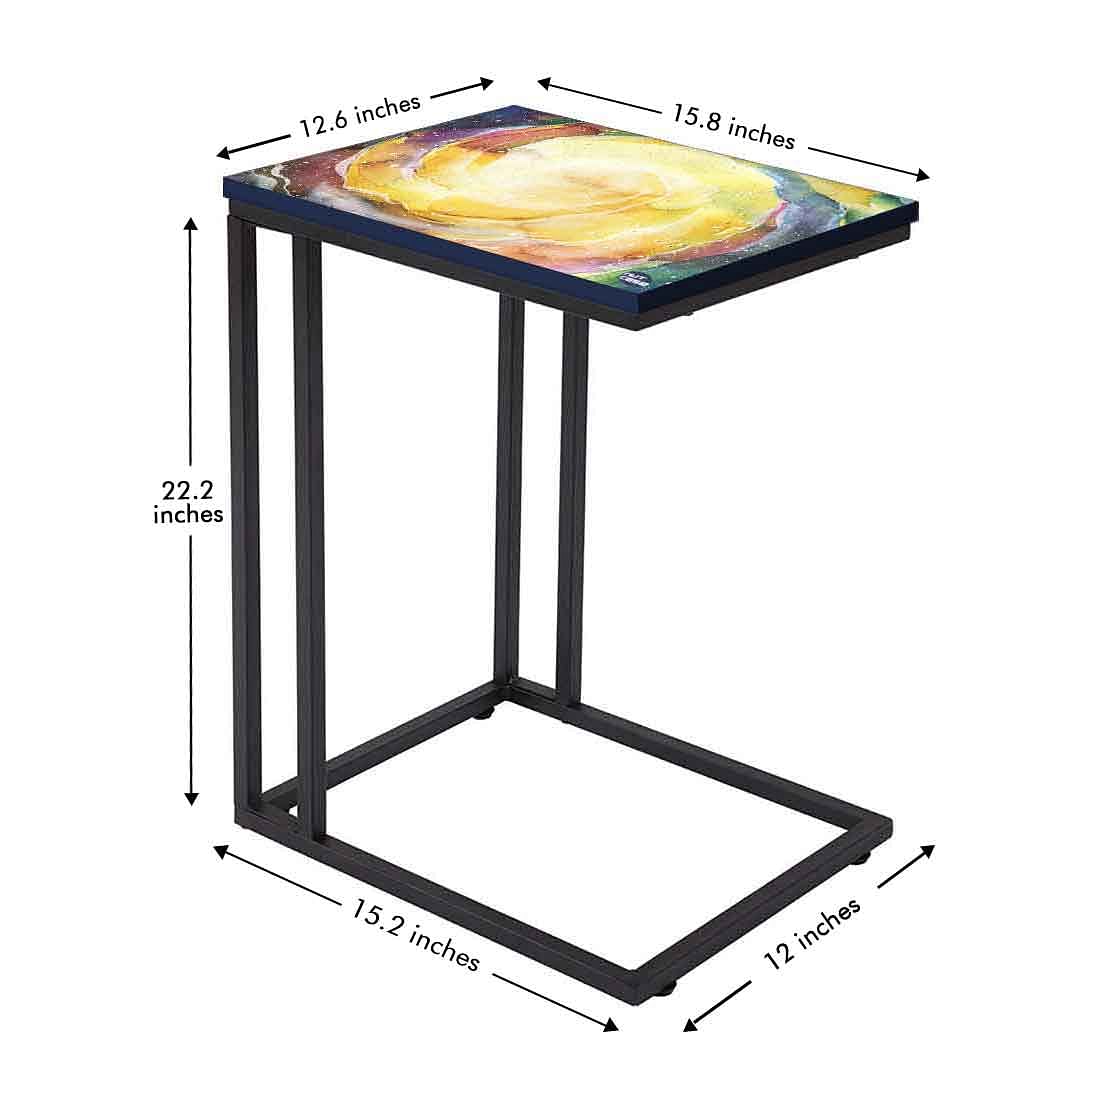 New C Shaped End Table - Space Yellow Watercolor Nutcase